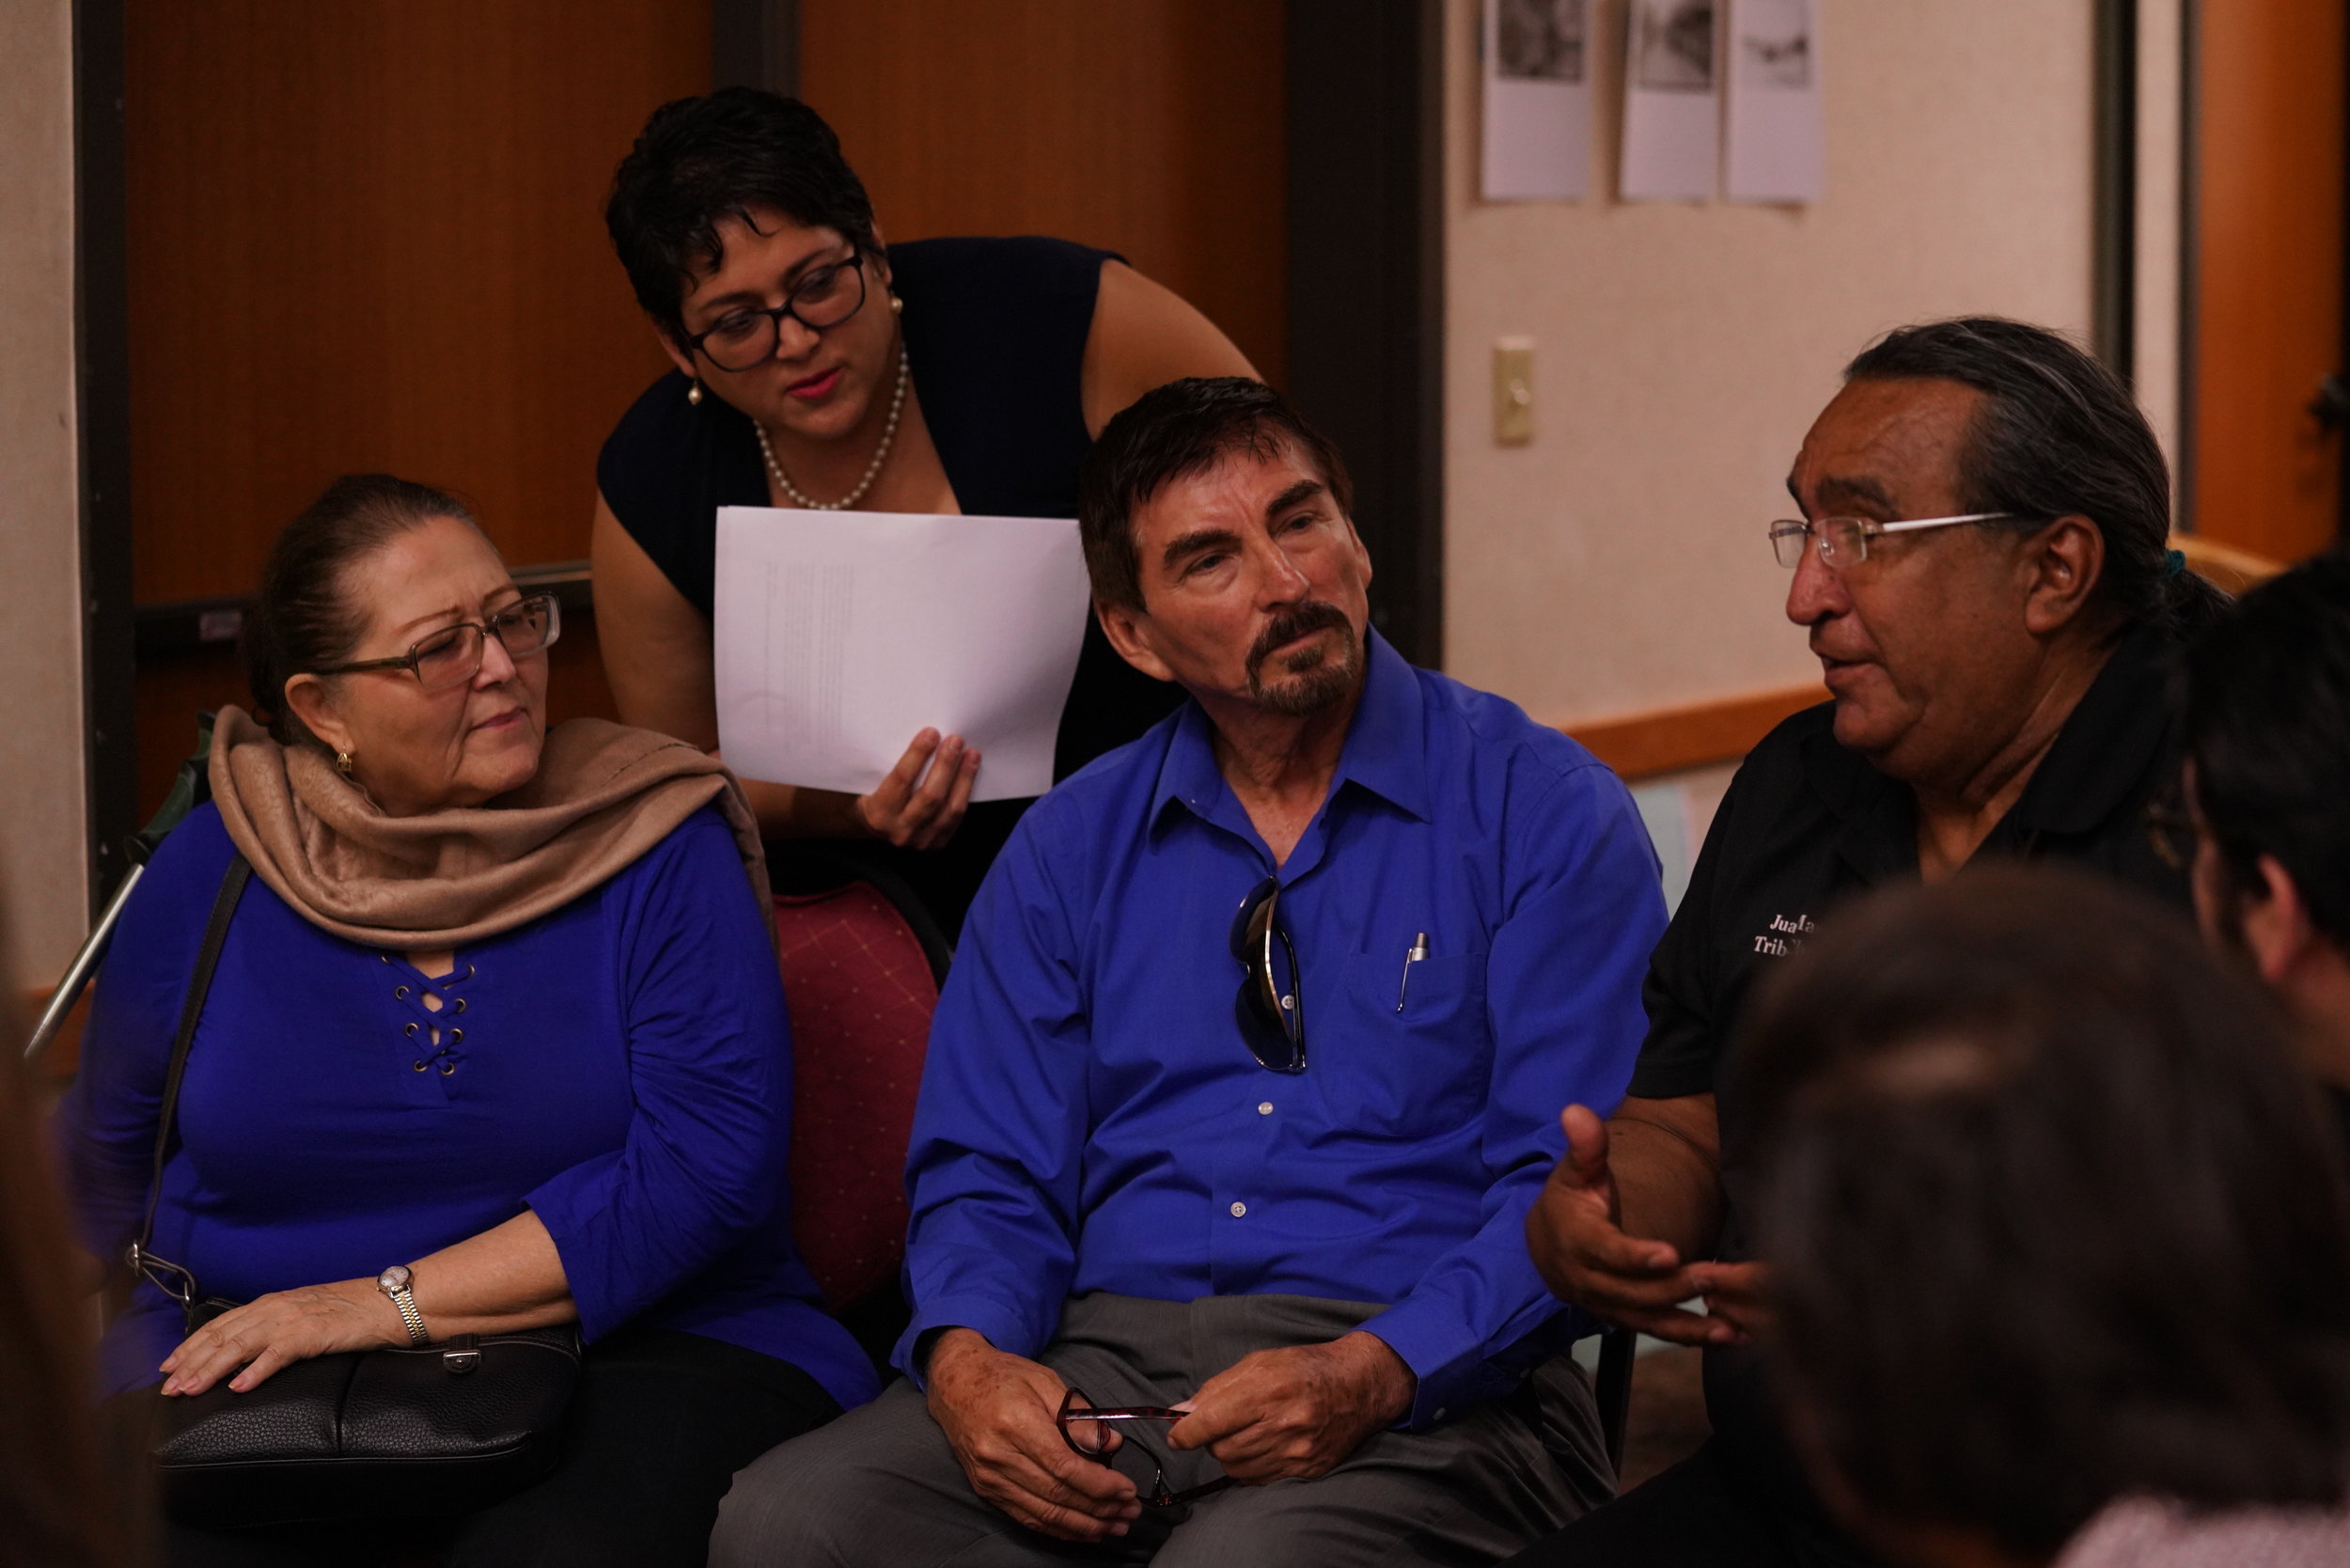 Community Members in Conversation During the Event "History of the Land" (Head Phase)  (Copy)